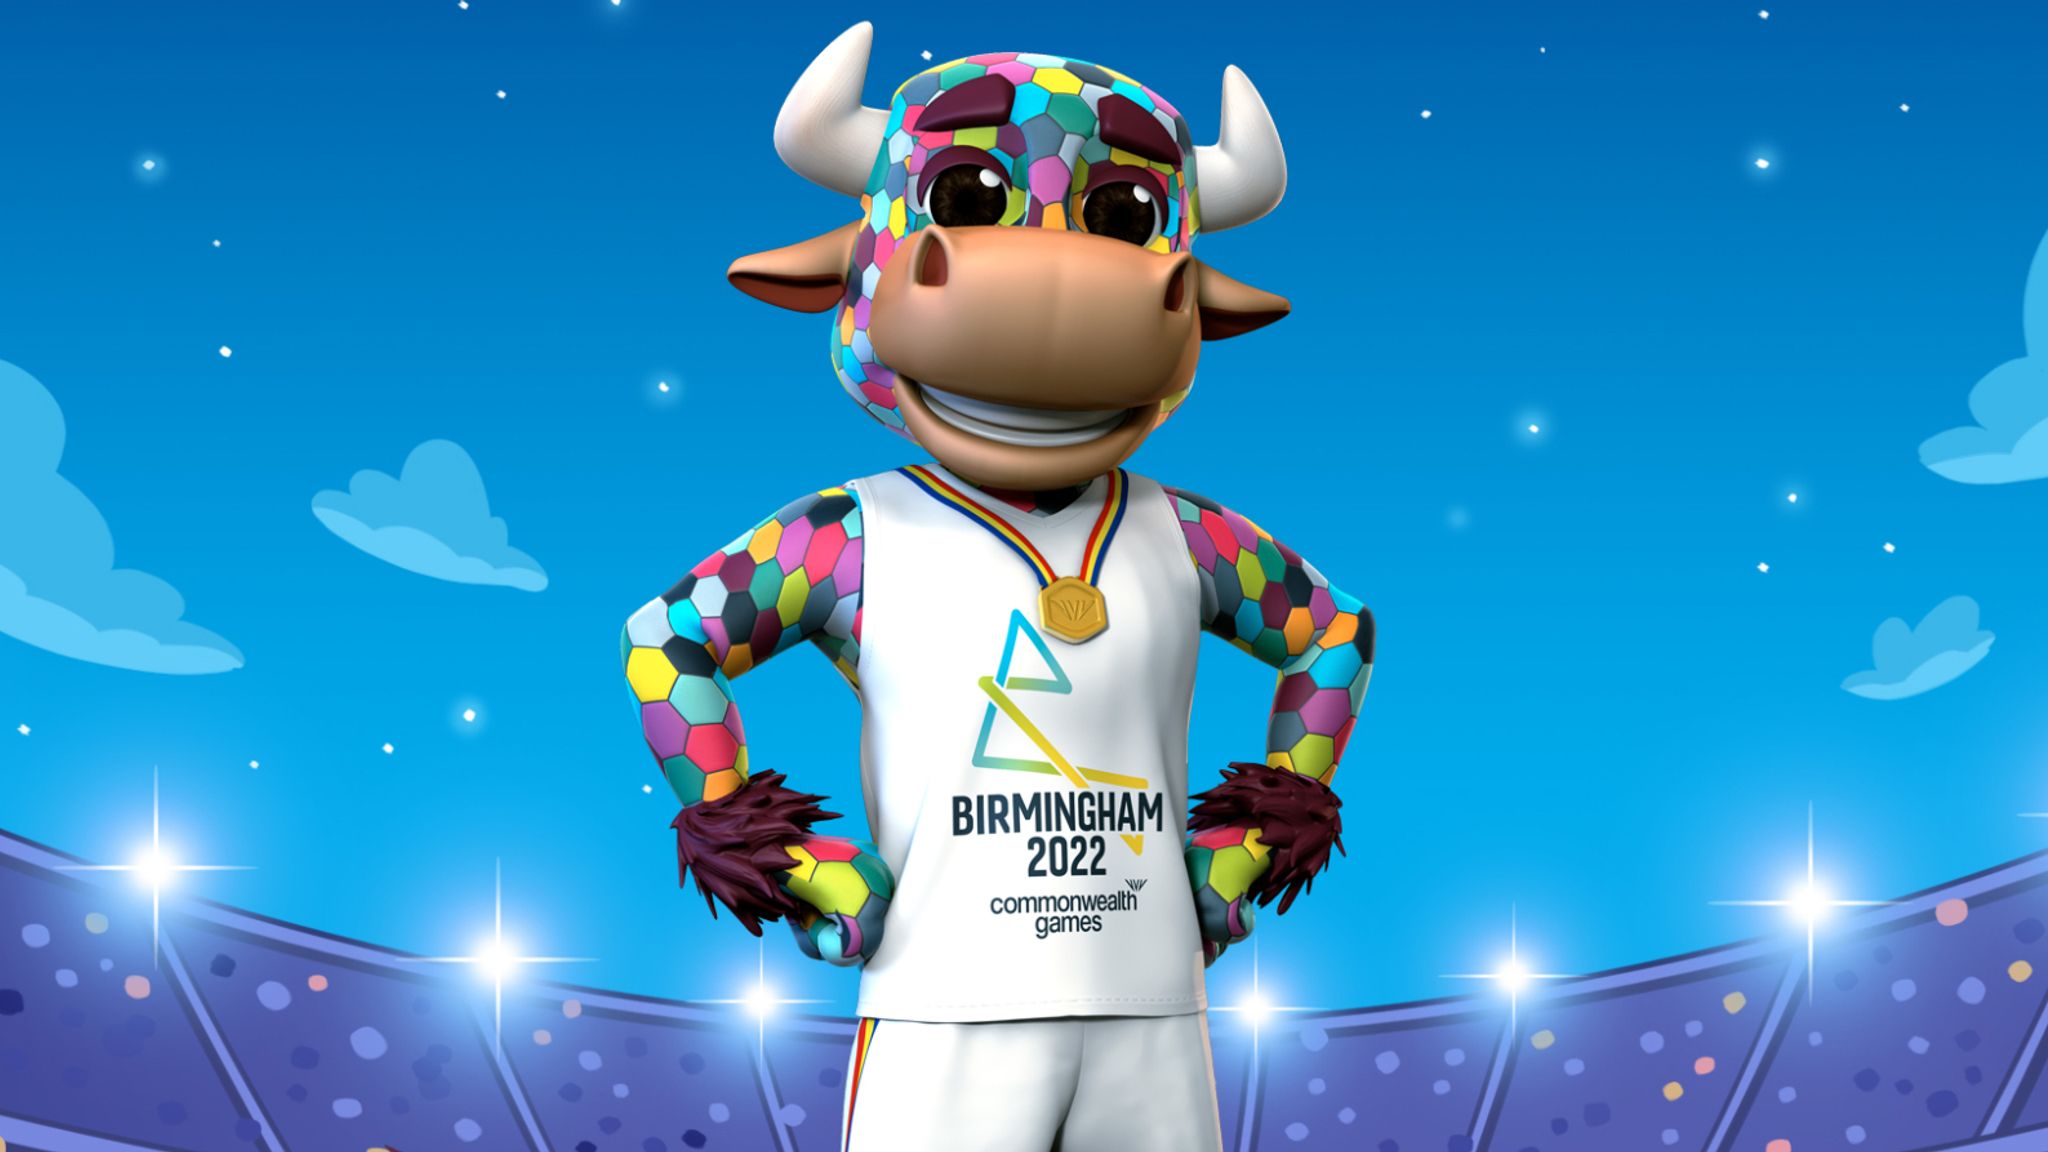 Perry is the official mascot of Birmingham 2022